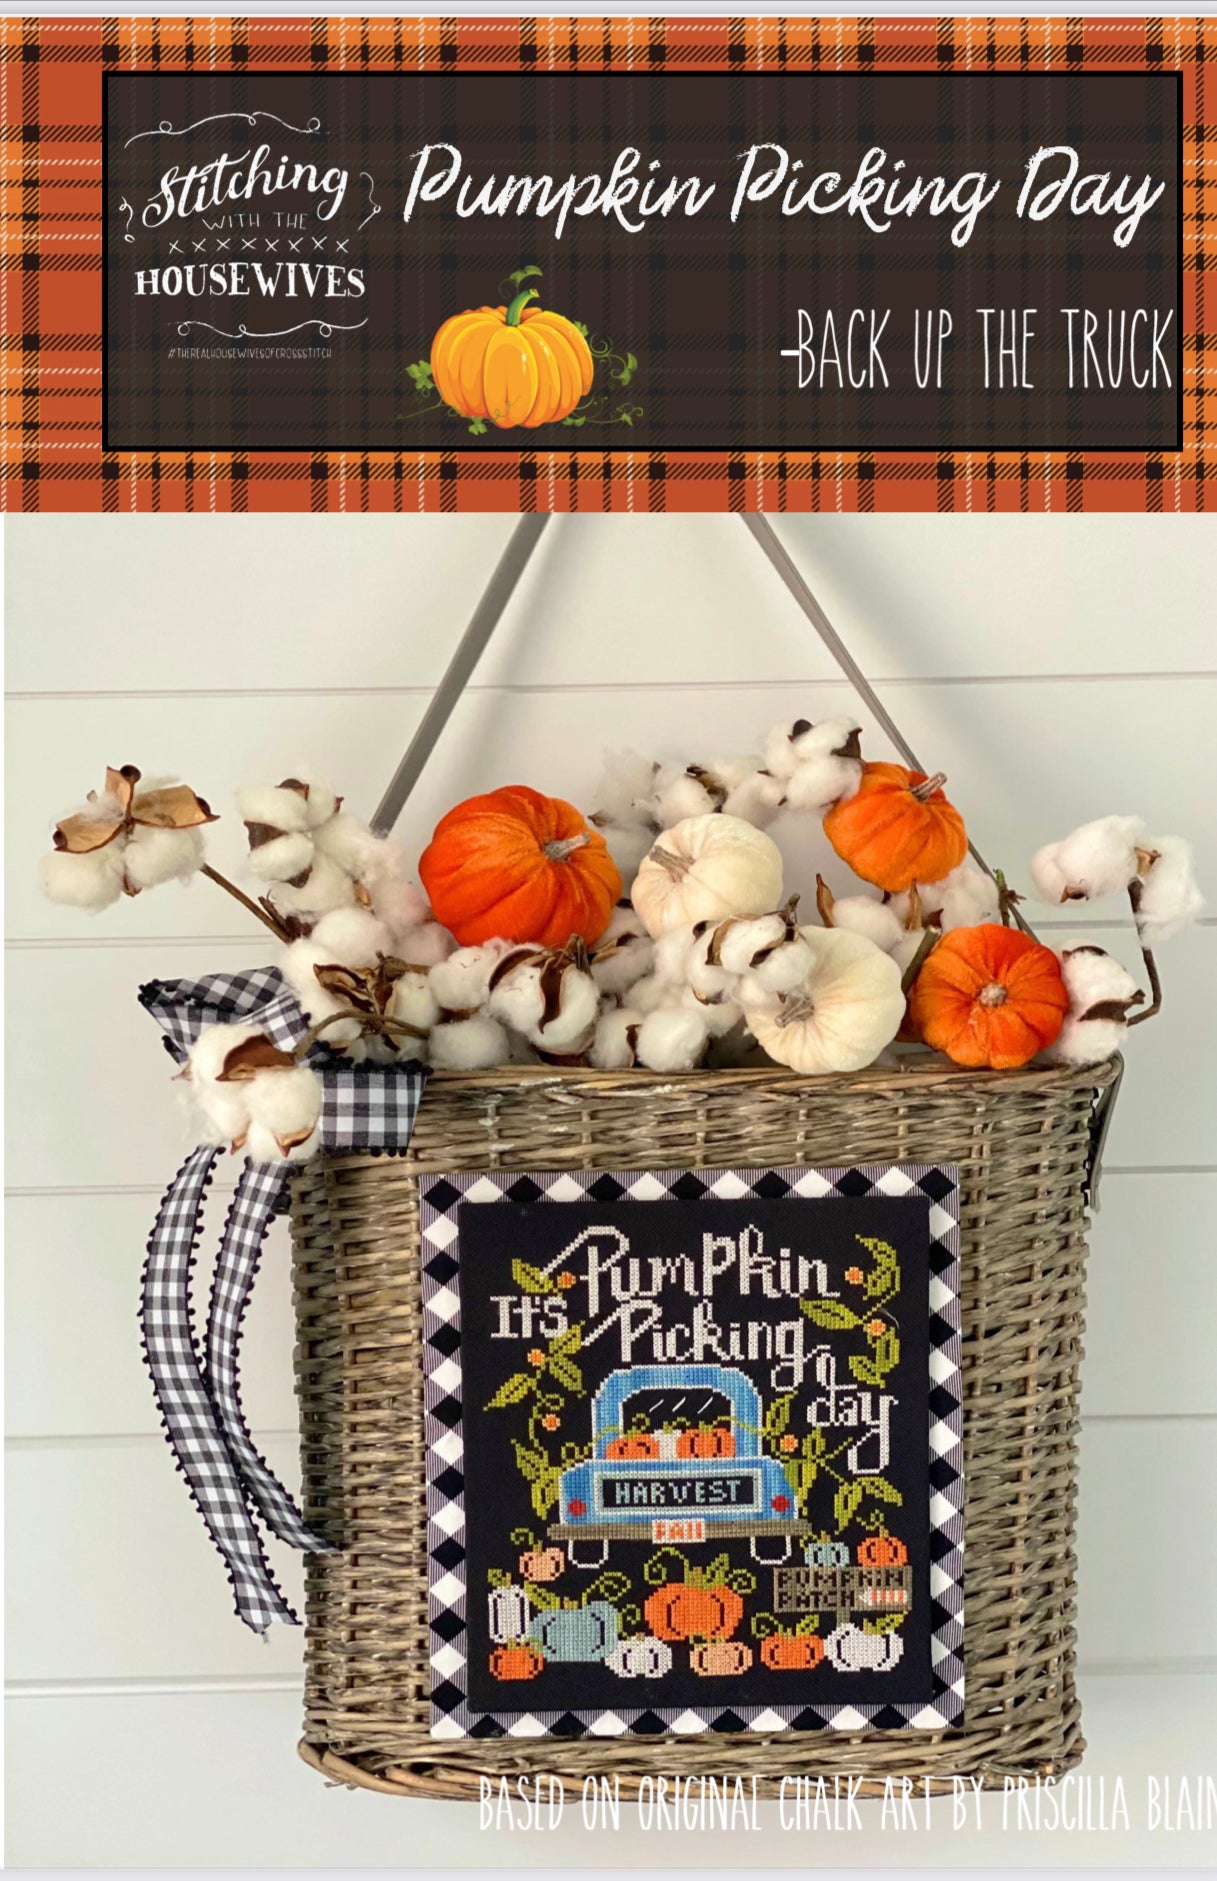 Stitching With The Housewives Pumpkin Picking Day cross stitch pattern